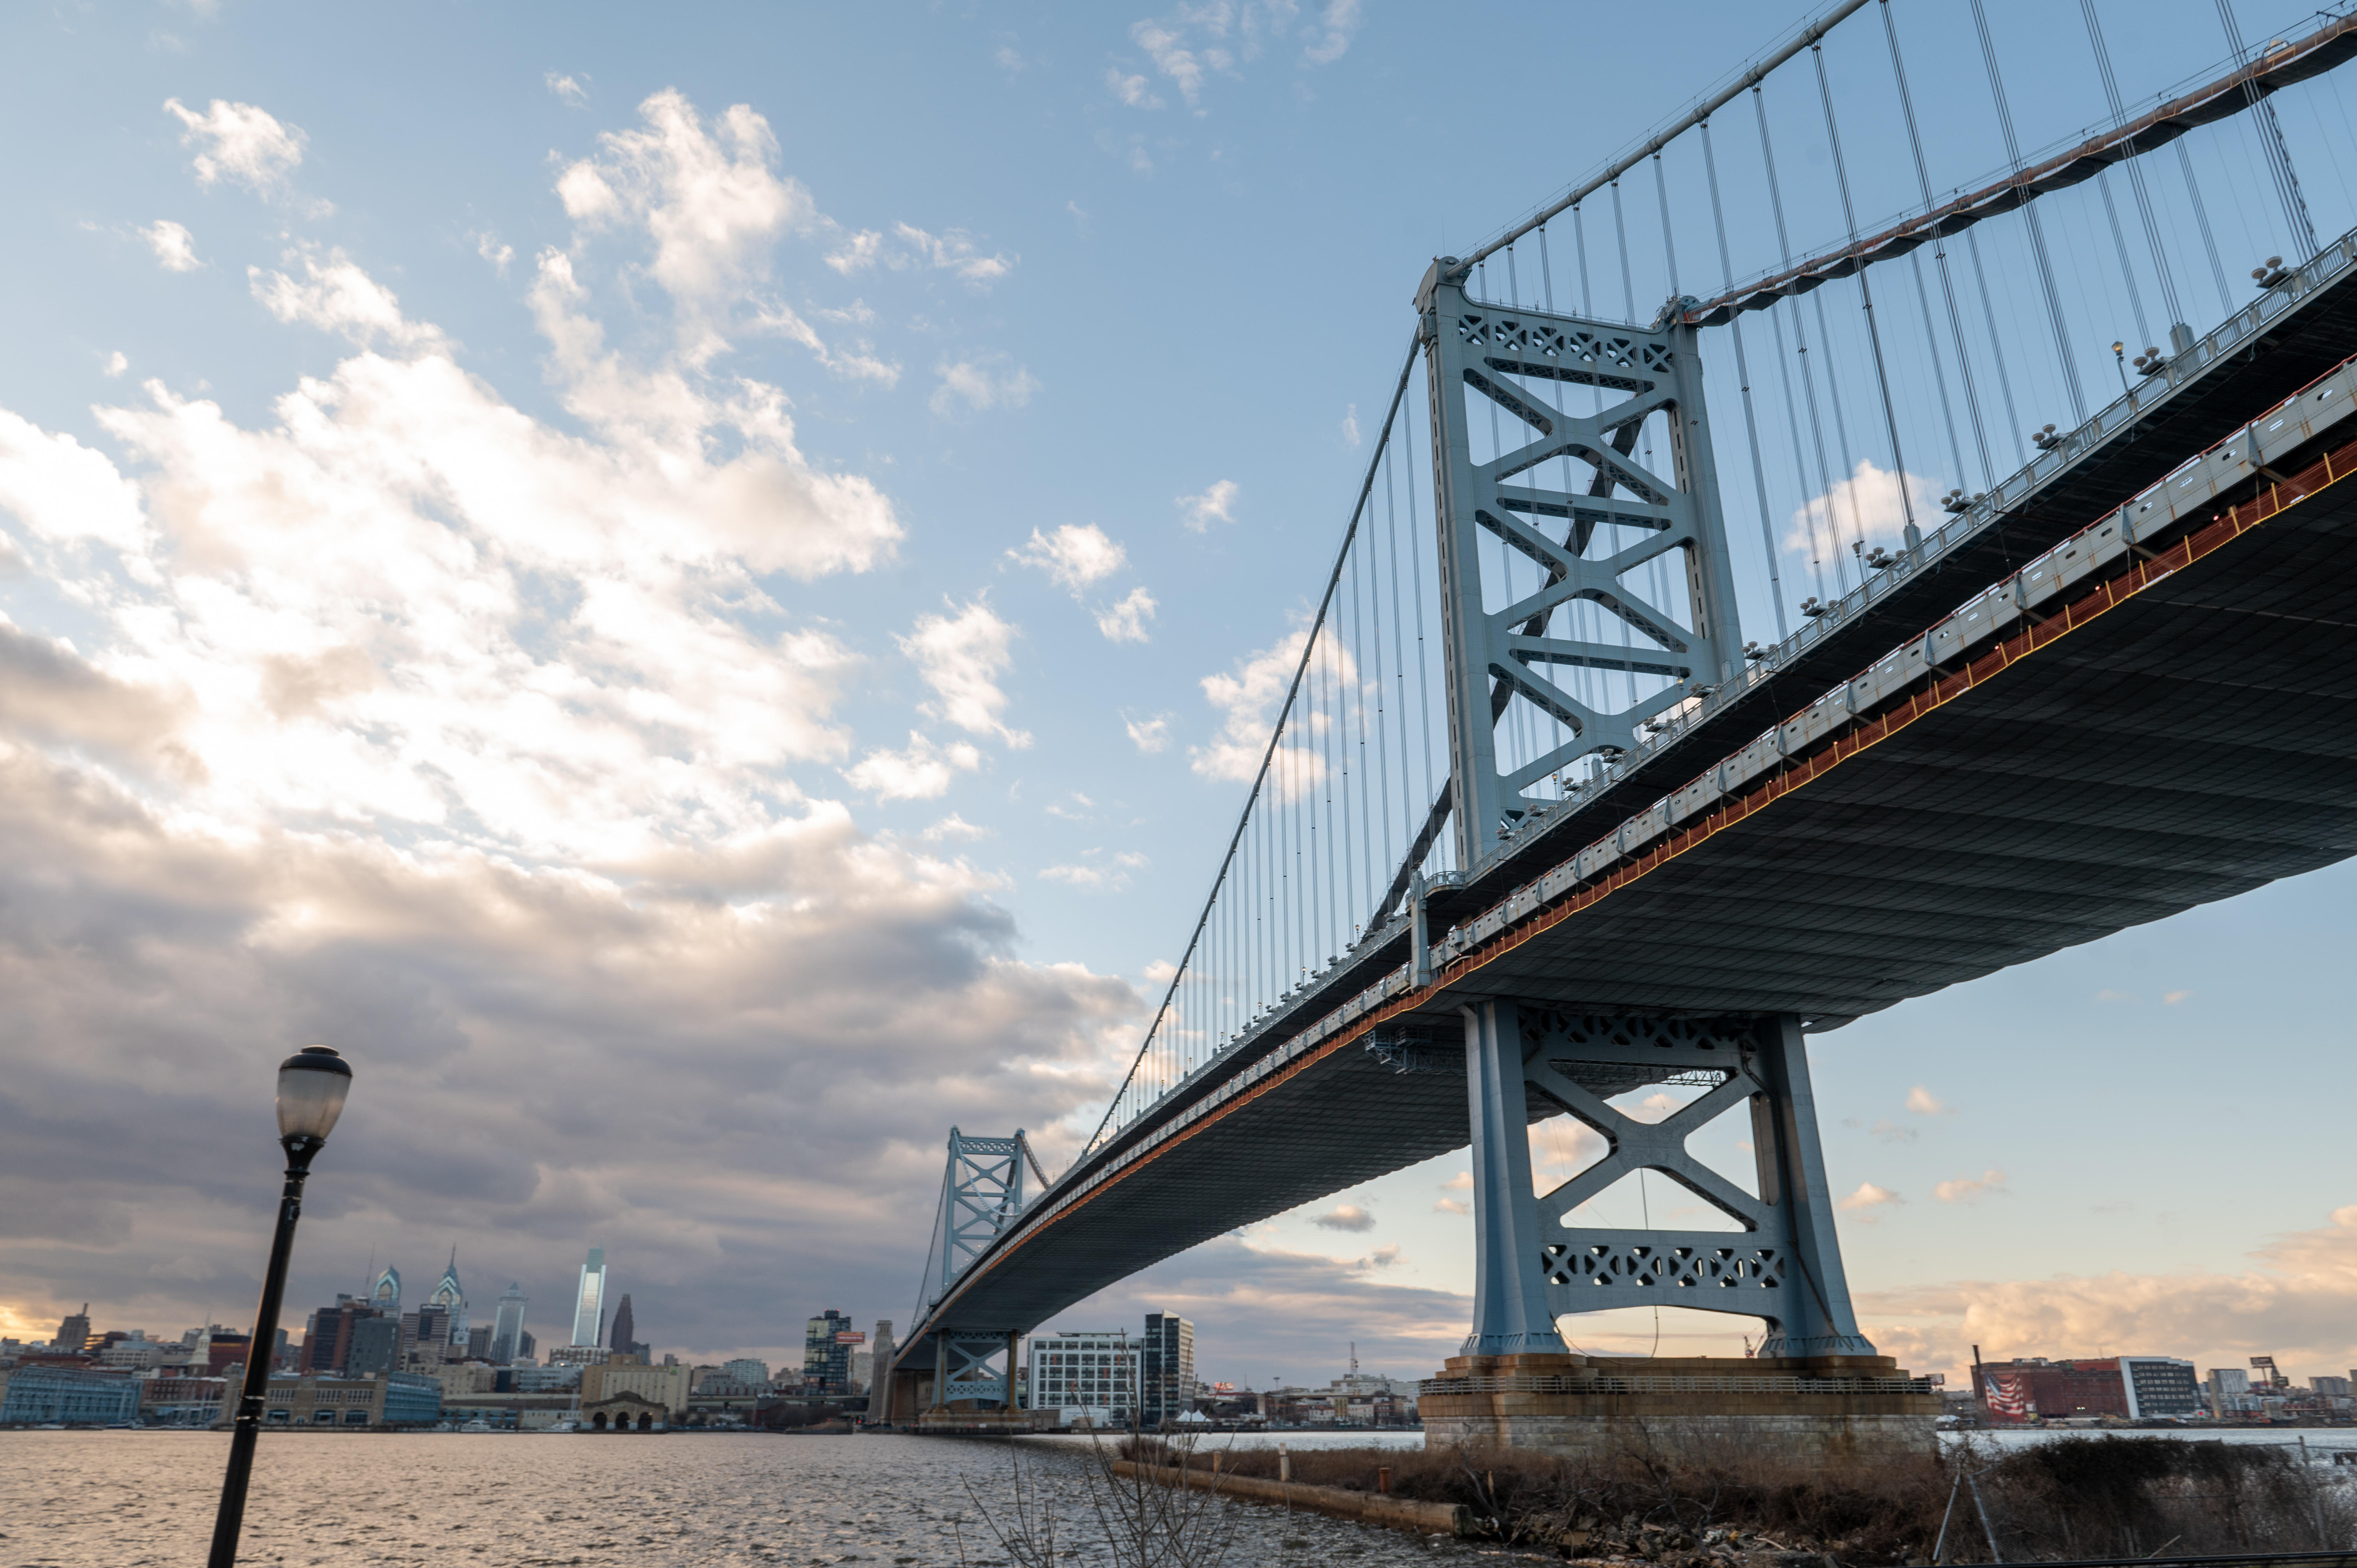 Delaware River bridges between N.J. and Philly will not go 100% E-ZPass